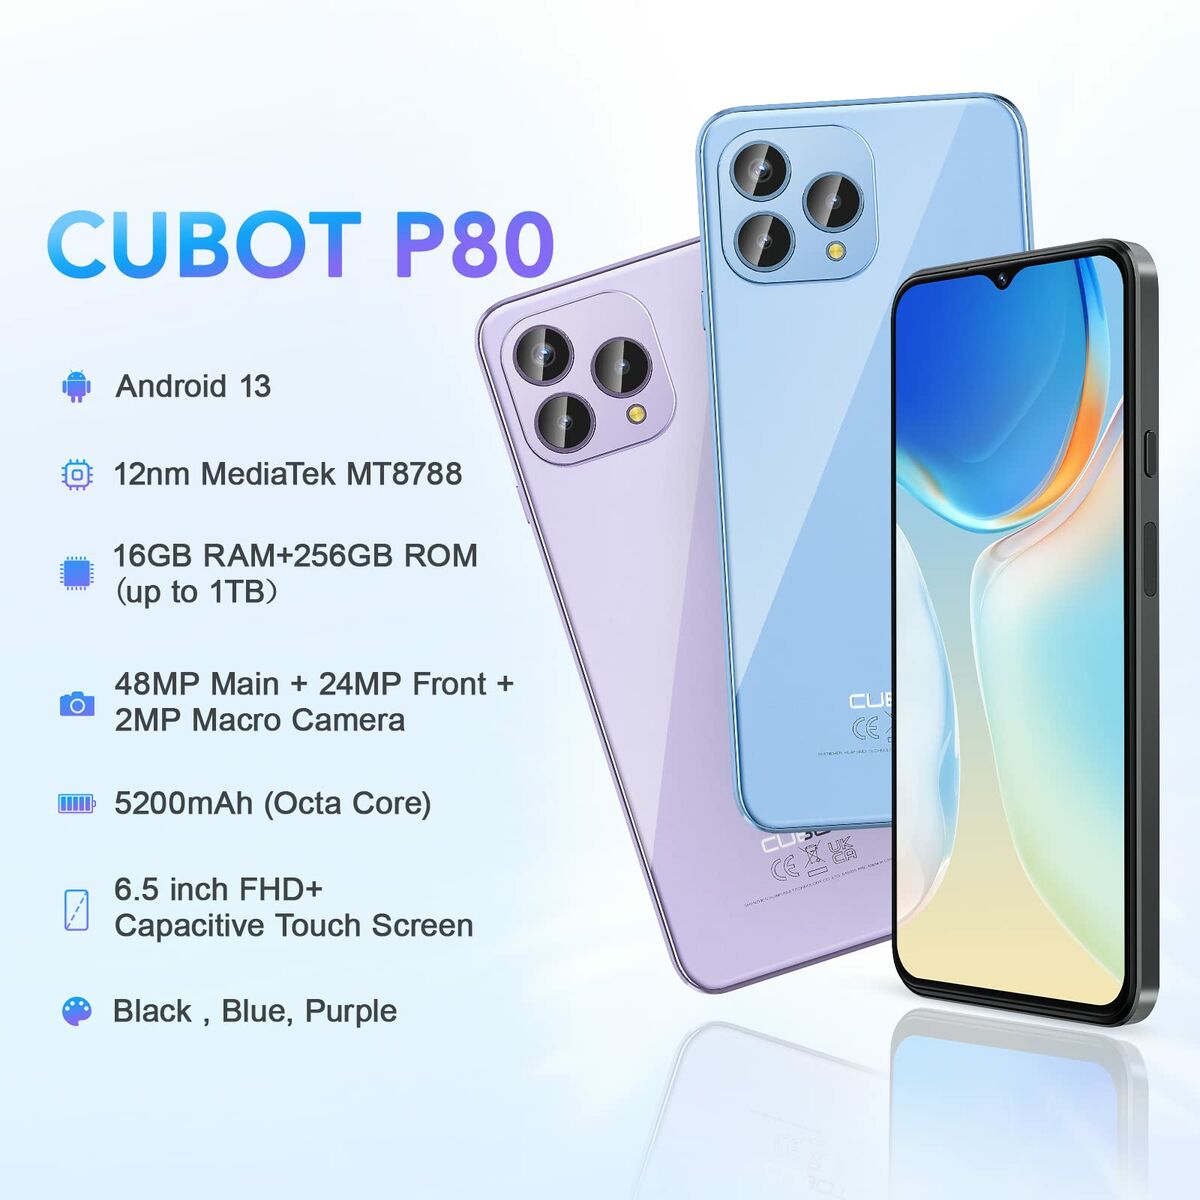 Smartphone Cubot P80 8 GB RAM 6,6" 256 GB, Cubot, Electronics, Mobile phones, smartphone-cubot-p80-8-gb-ram-6-6-256-gb, :256 GB, Brand_Cubot, category-reference-2609, category-reference-2617, category-reference-2618, category-reference-t-19653, category-reference-t-19894, Condition_NEW, office, Price_100 - 200, telephones & tablets, Teleworking, wifi y bluetooth, RiotNook